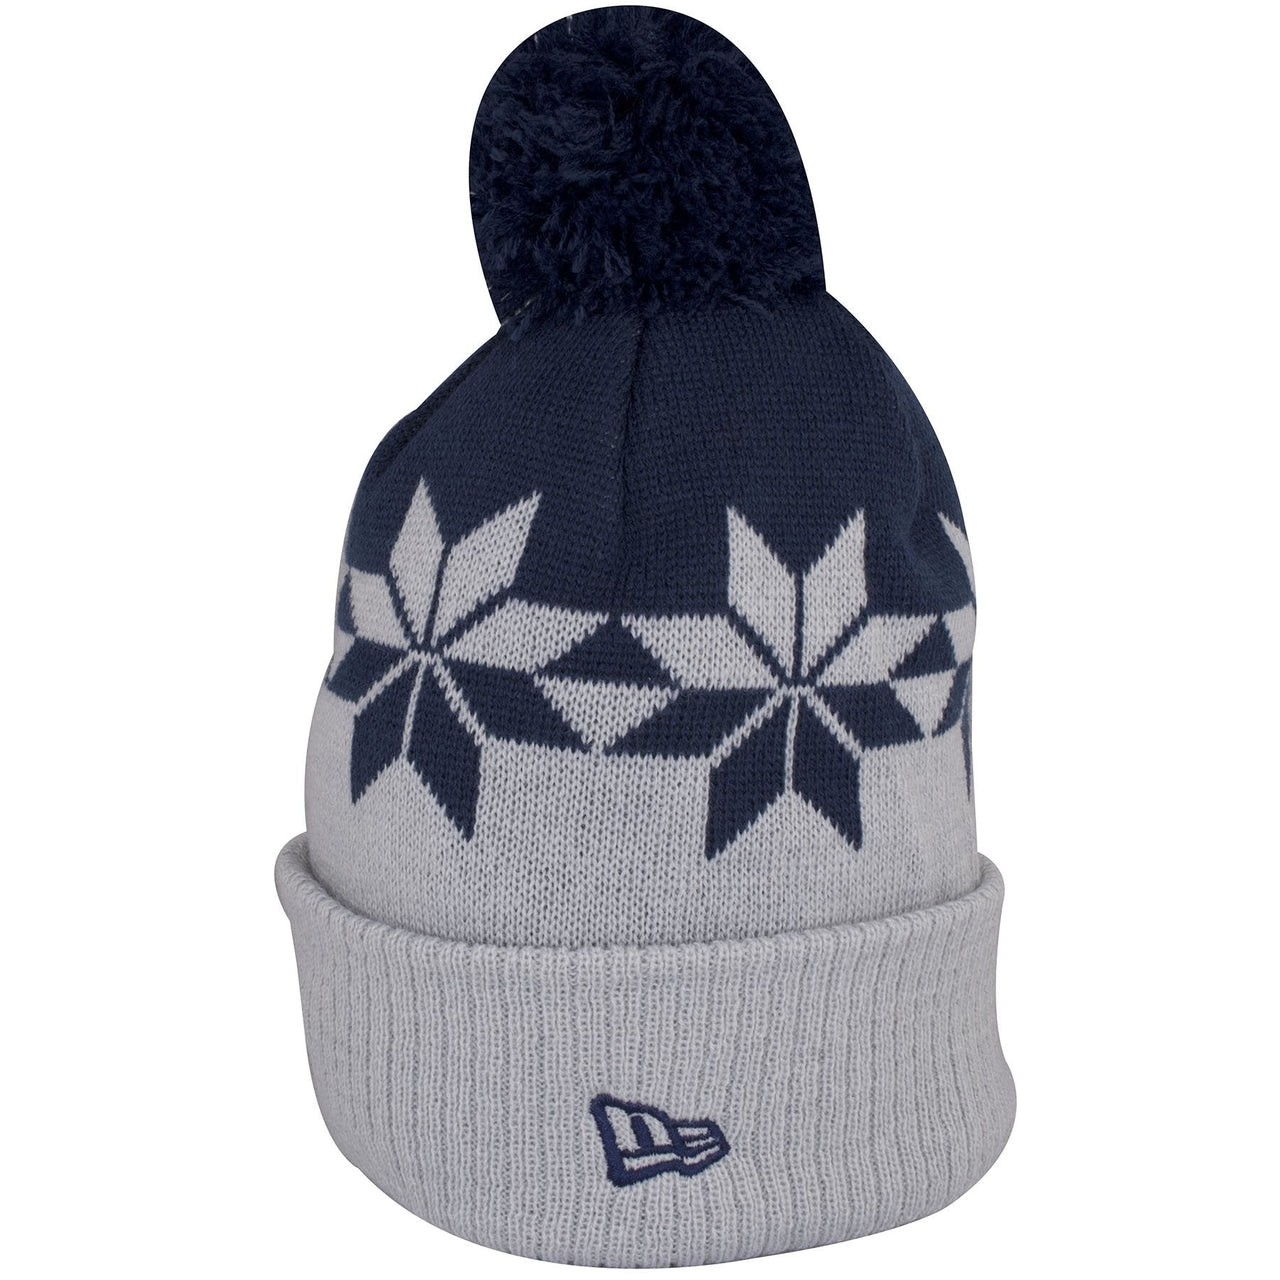 The left side of this Cowboy Gray beanie hat is a navy blue New Era Flag logo embroidered.